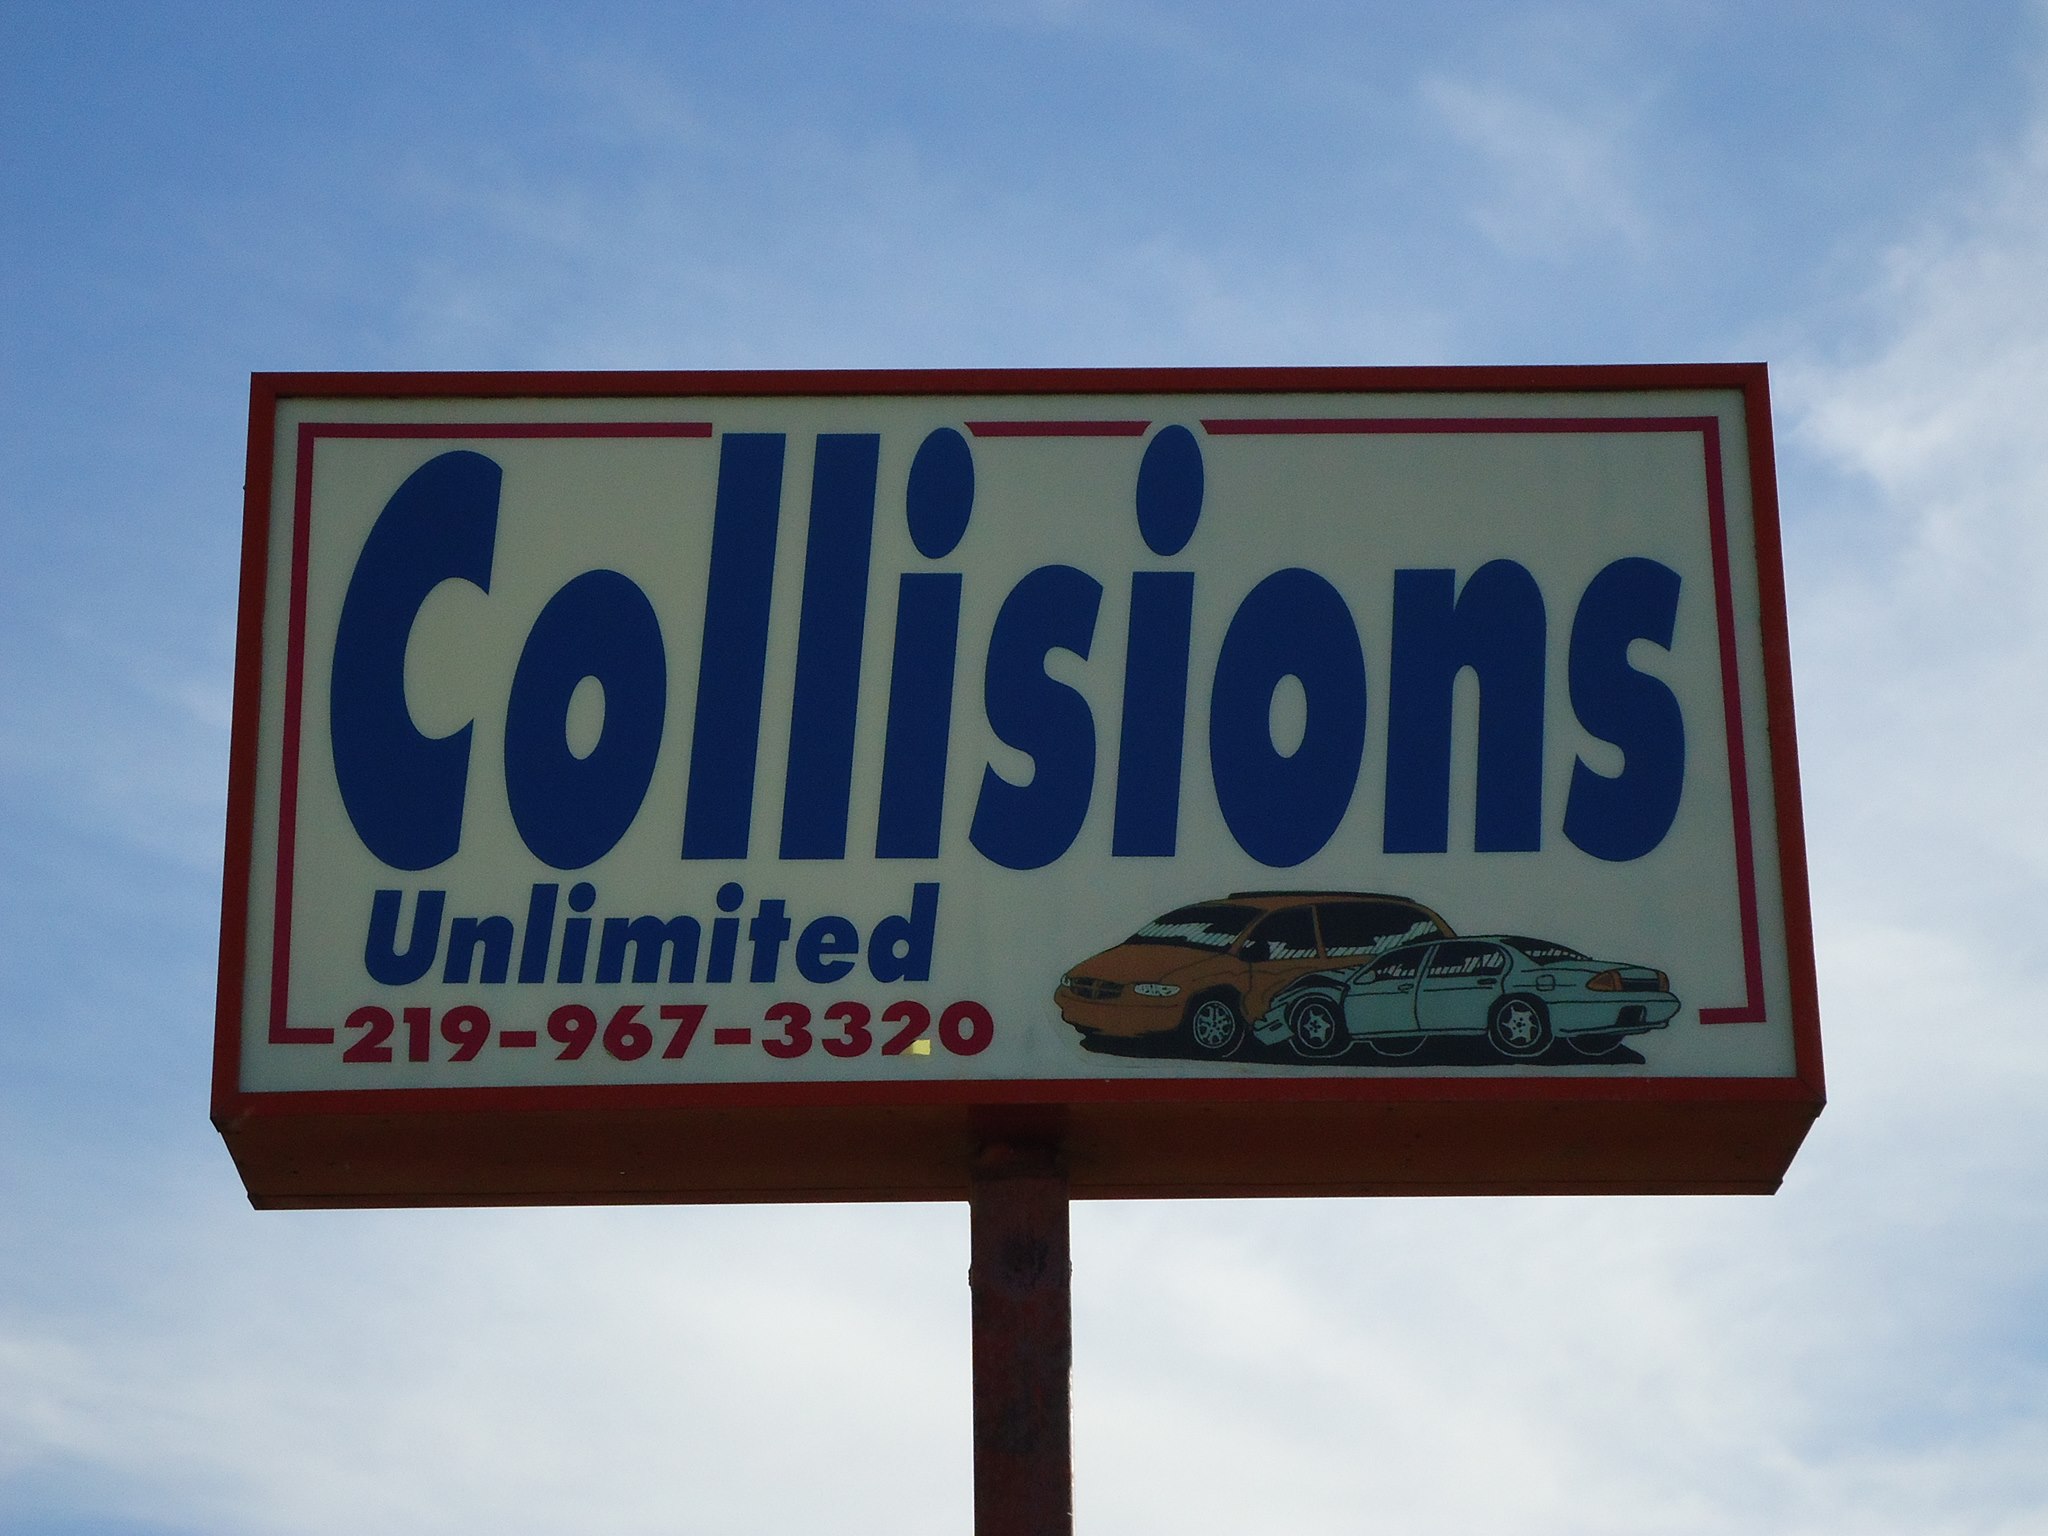 Collisions Unlimited Inc